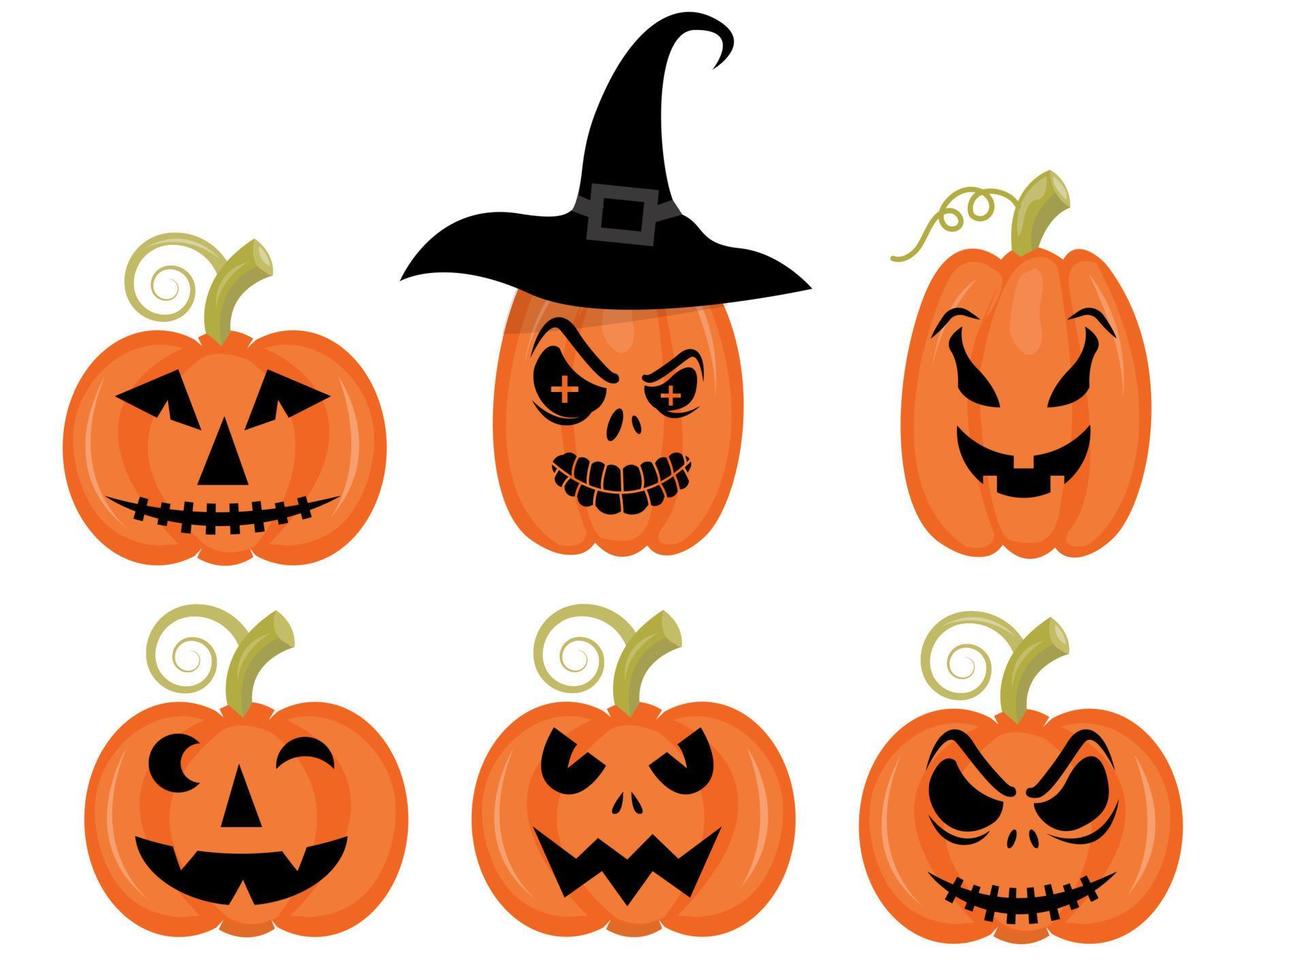 Orange pumpkin with smile and witch hat for your design for the holiday Halloween on white background. Vector illustration